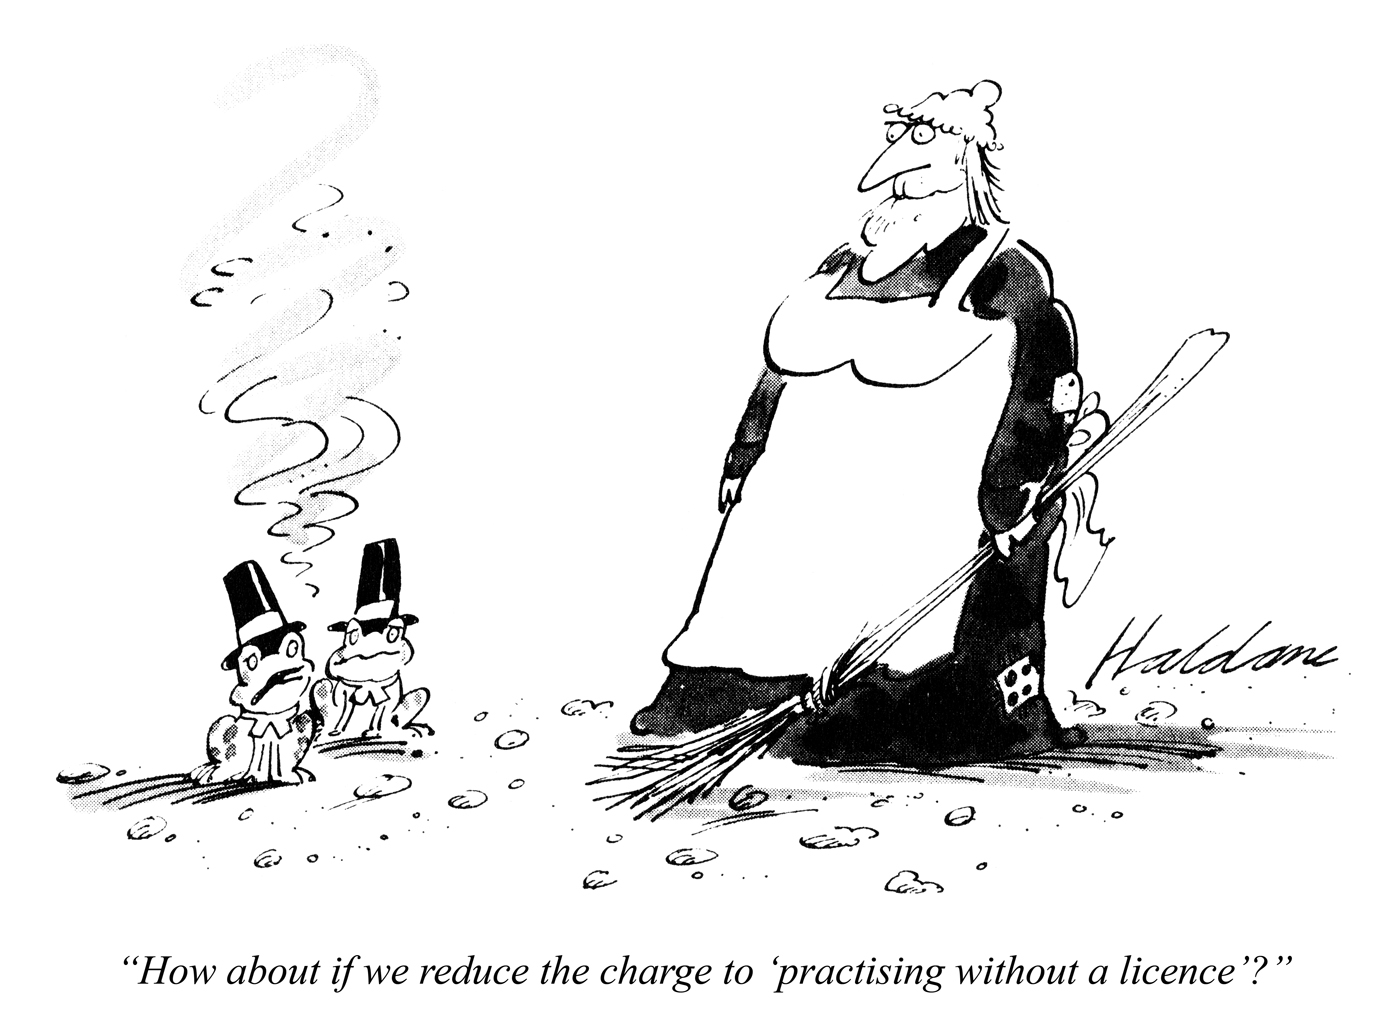 “How about if we reduce the charge to ‘practising without a licence’?” © Punch Ltd